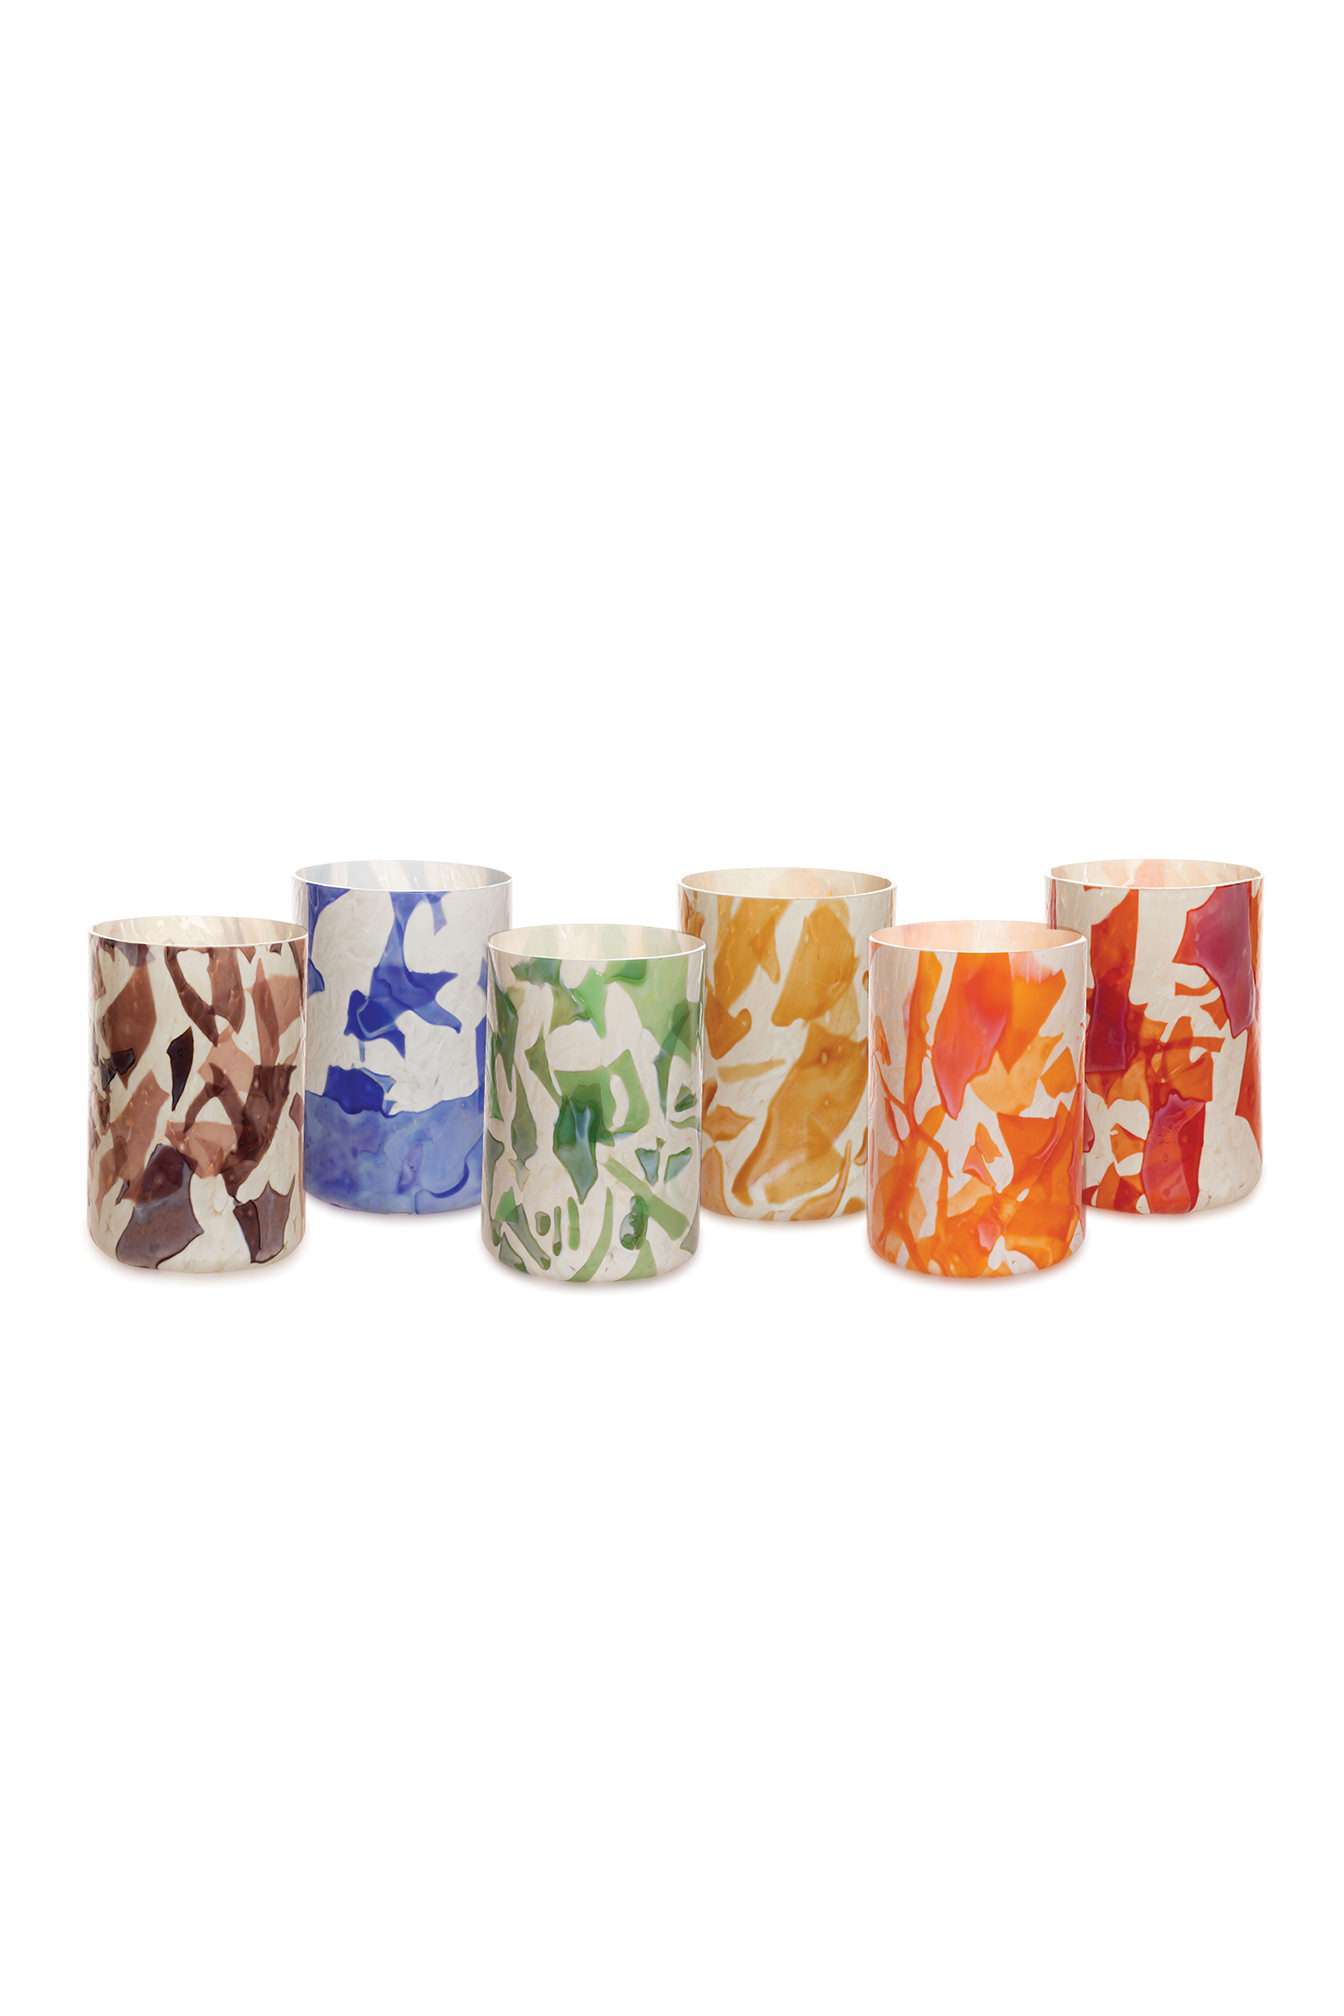 Stories-of-Italy-Nougat-Rainbow-Tumblers-Set-of-6-Clear-cut